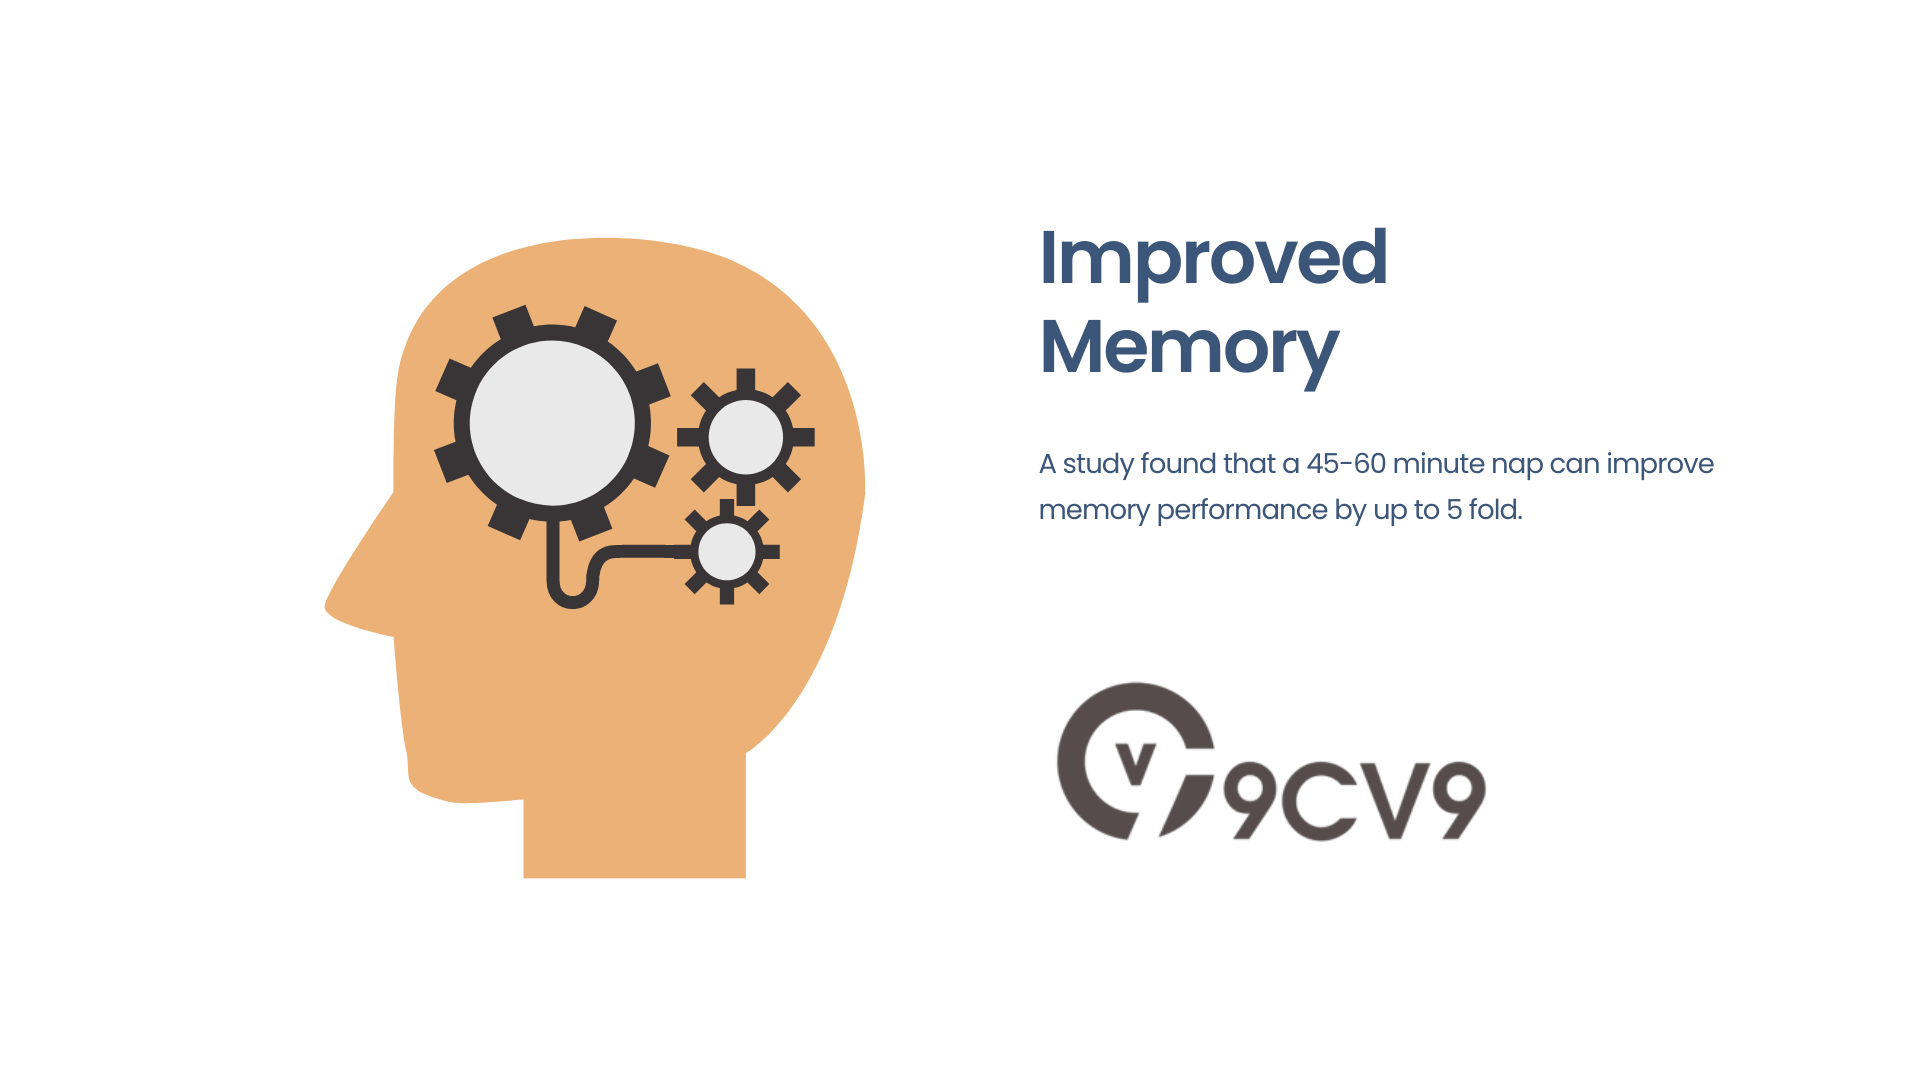 Improved Memory